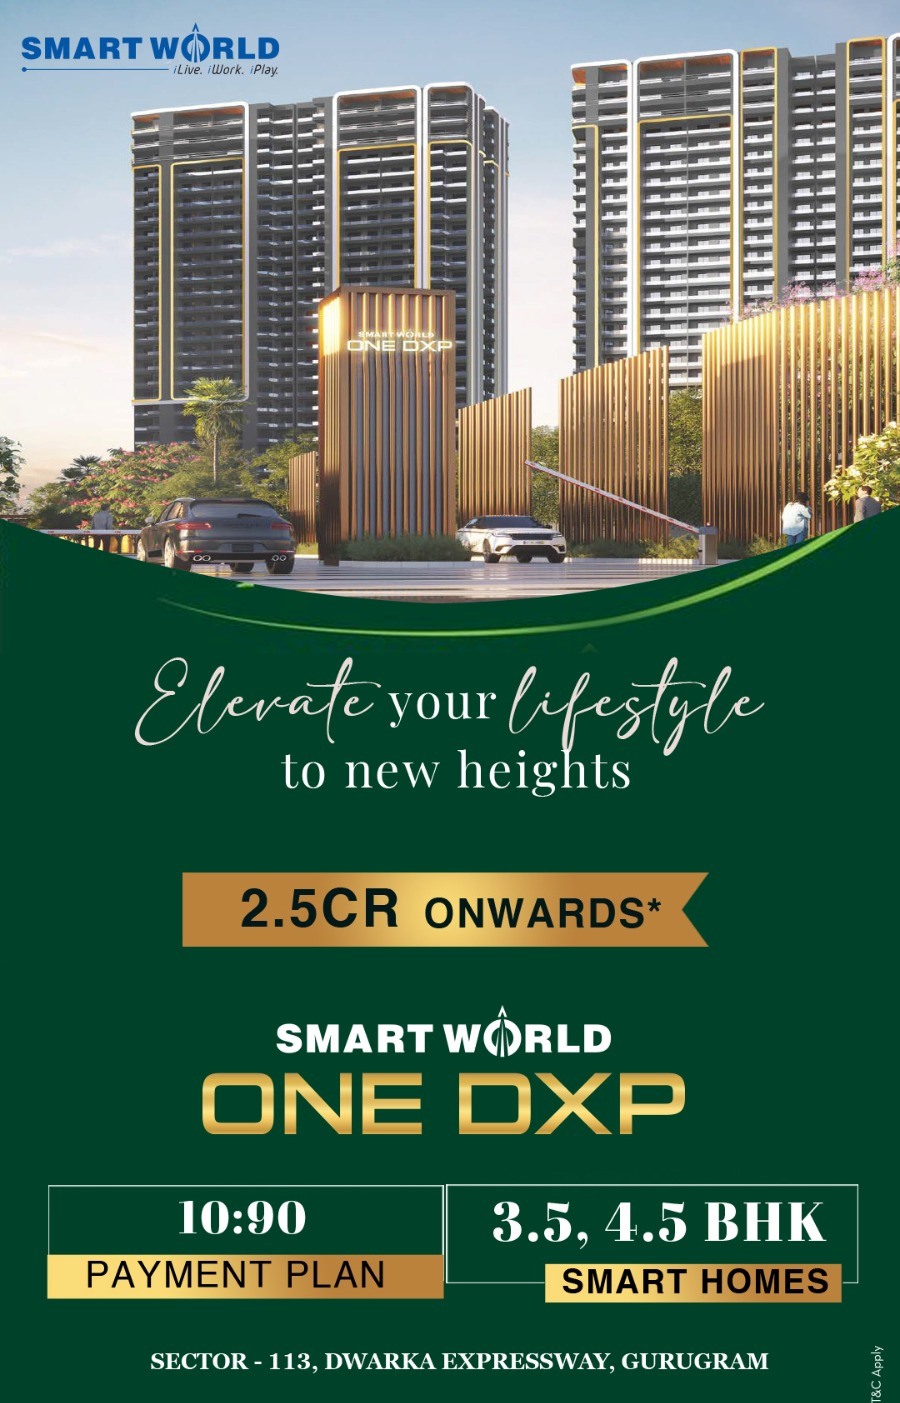 The residential property offers an extraordinary front room and utility including modular kitchens and terraces at Smart World One DXP, Gurgaon Update